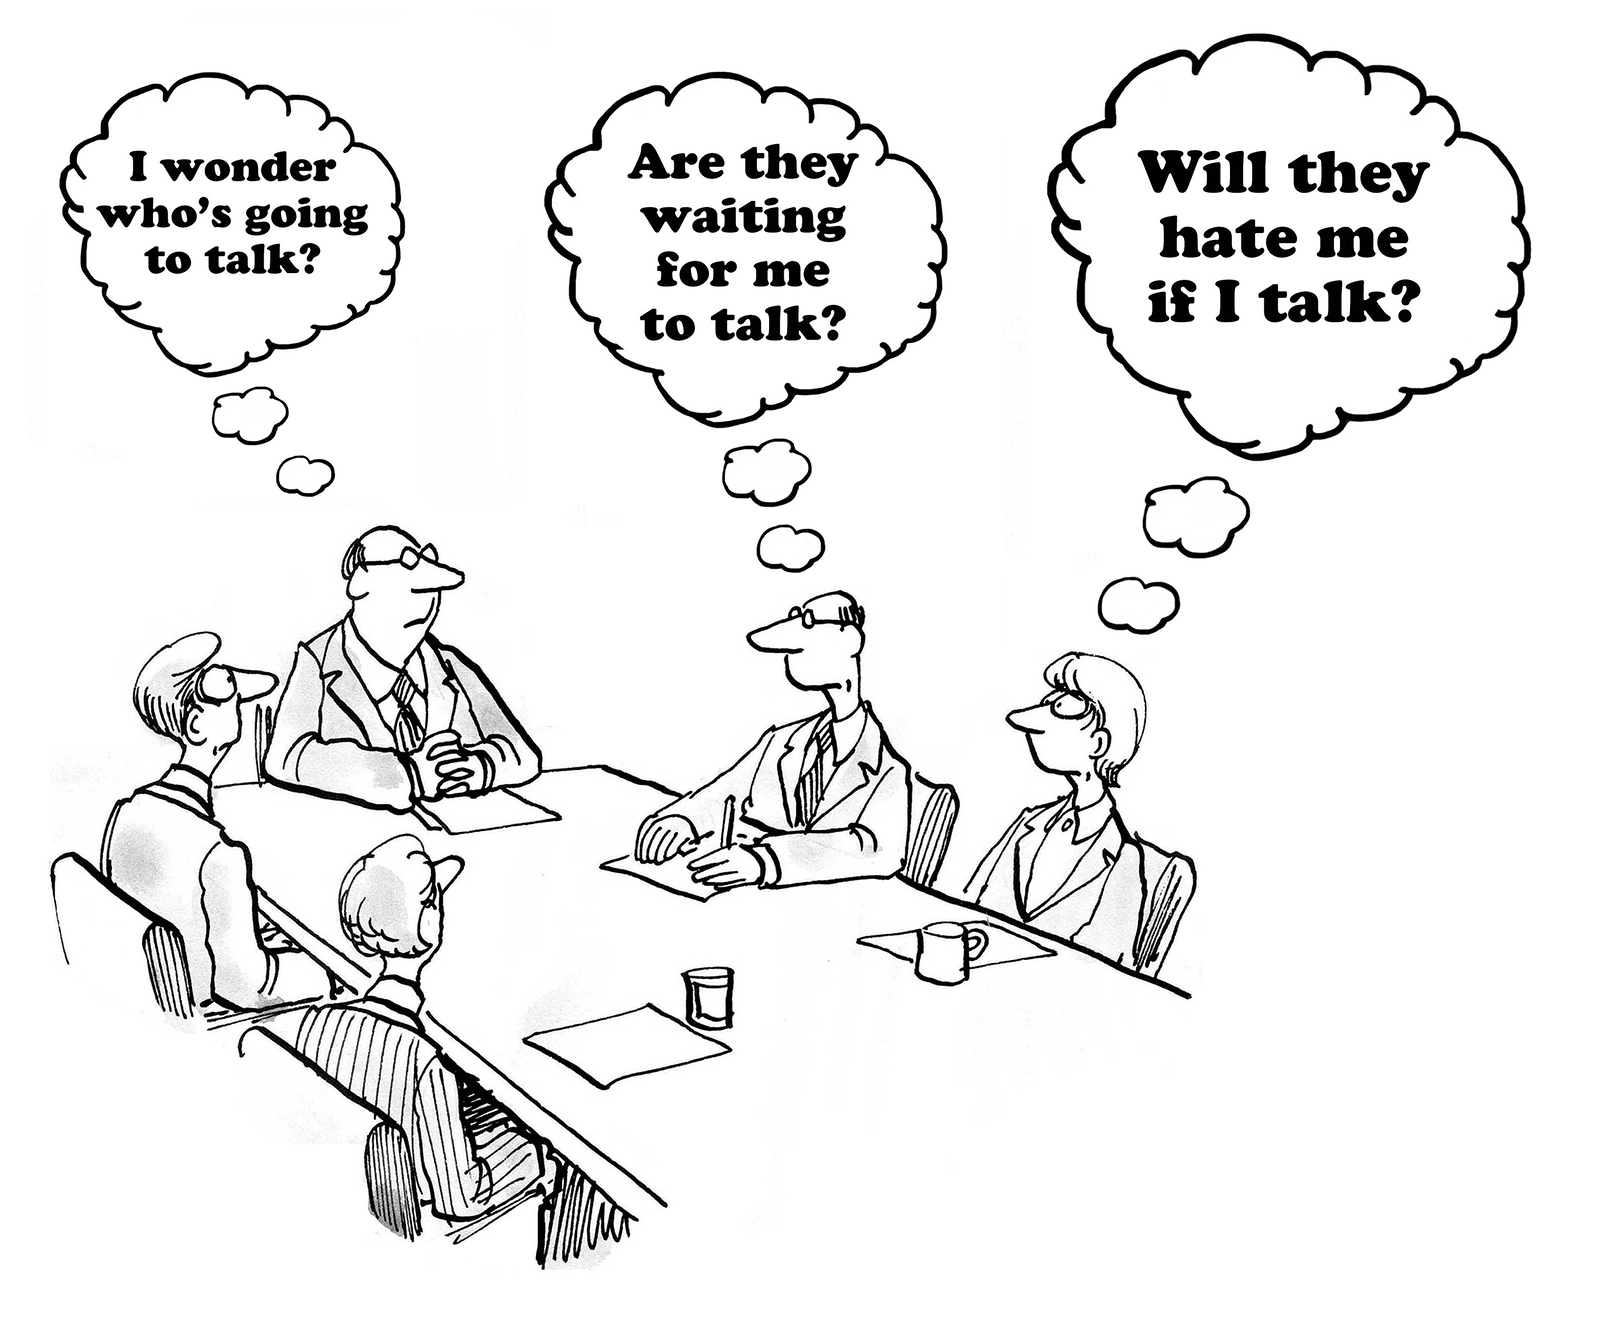 Business cartoon about hesitancy to talk in a meeting. - Michael Kerr